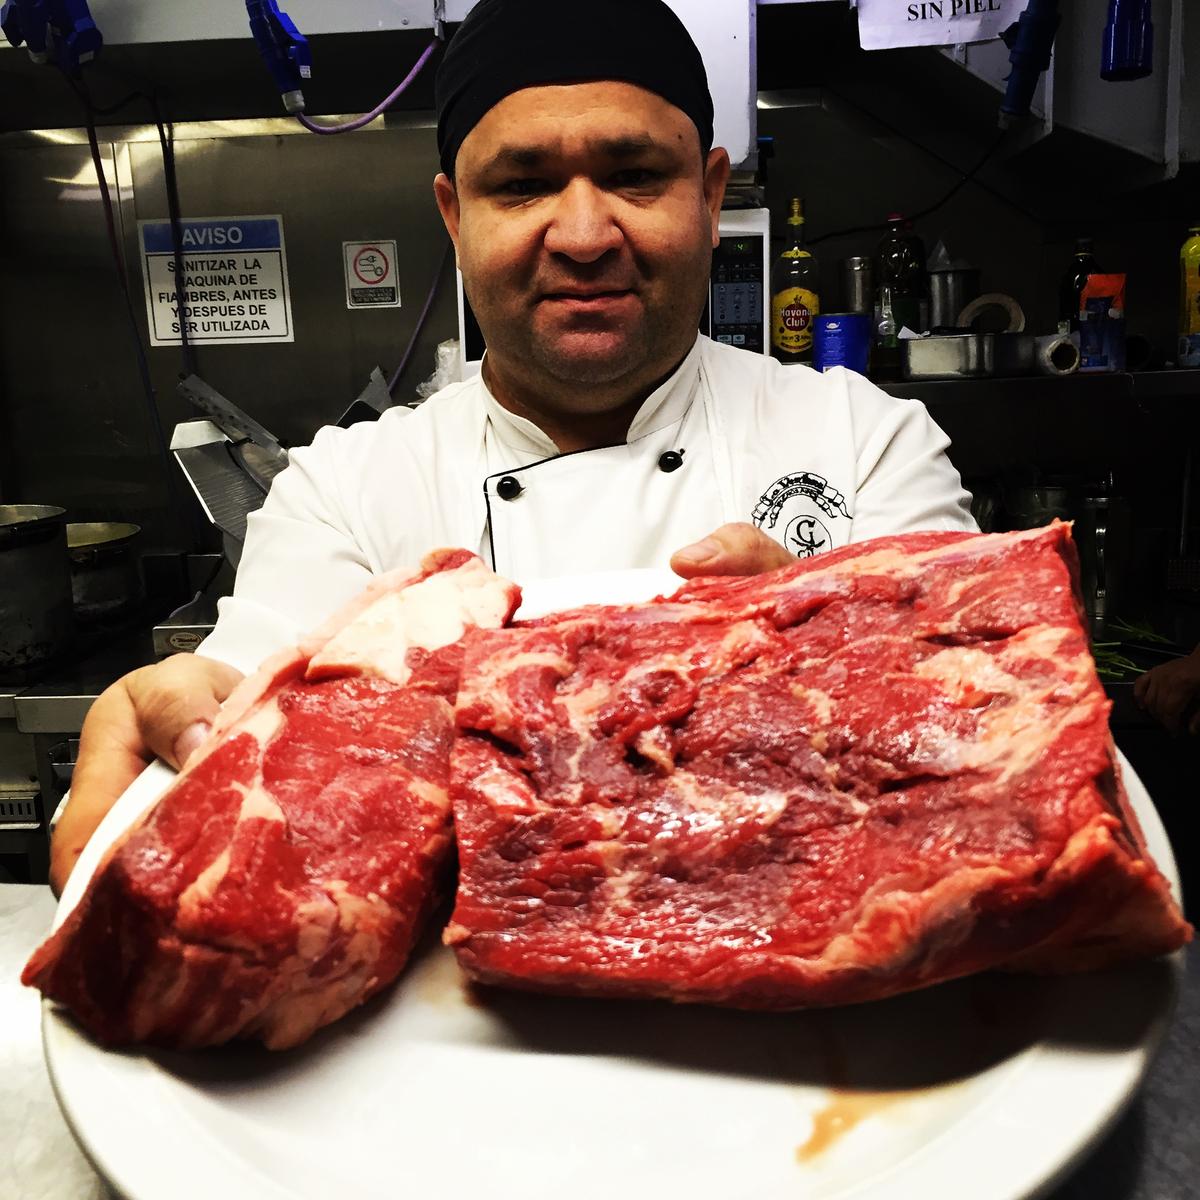 A chef holds up the steak destined for cooking at Don Julio restaurant in Buenos Aires, Argentina. (Tim Johnson)